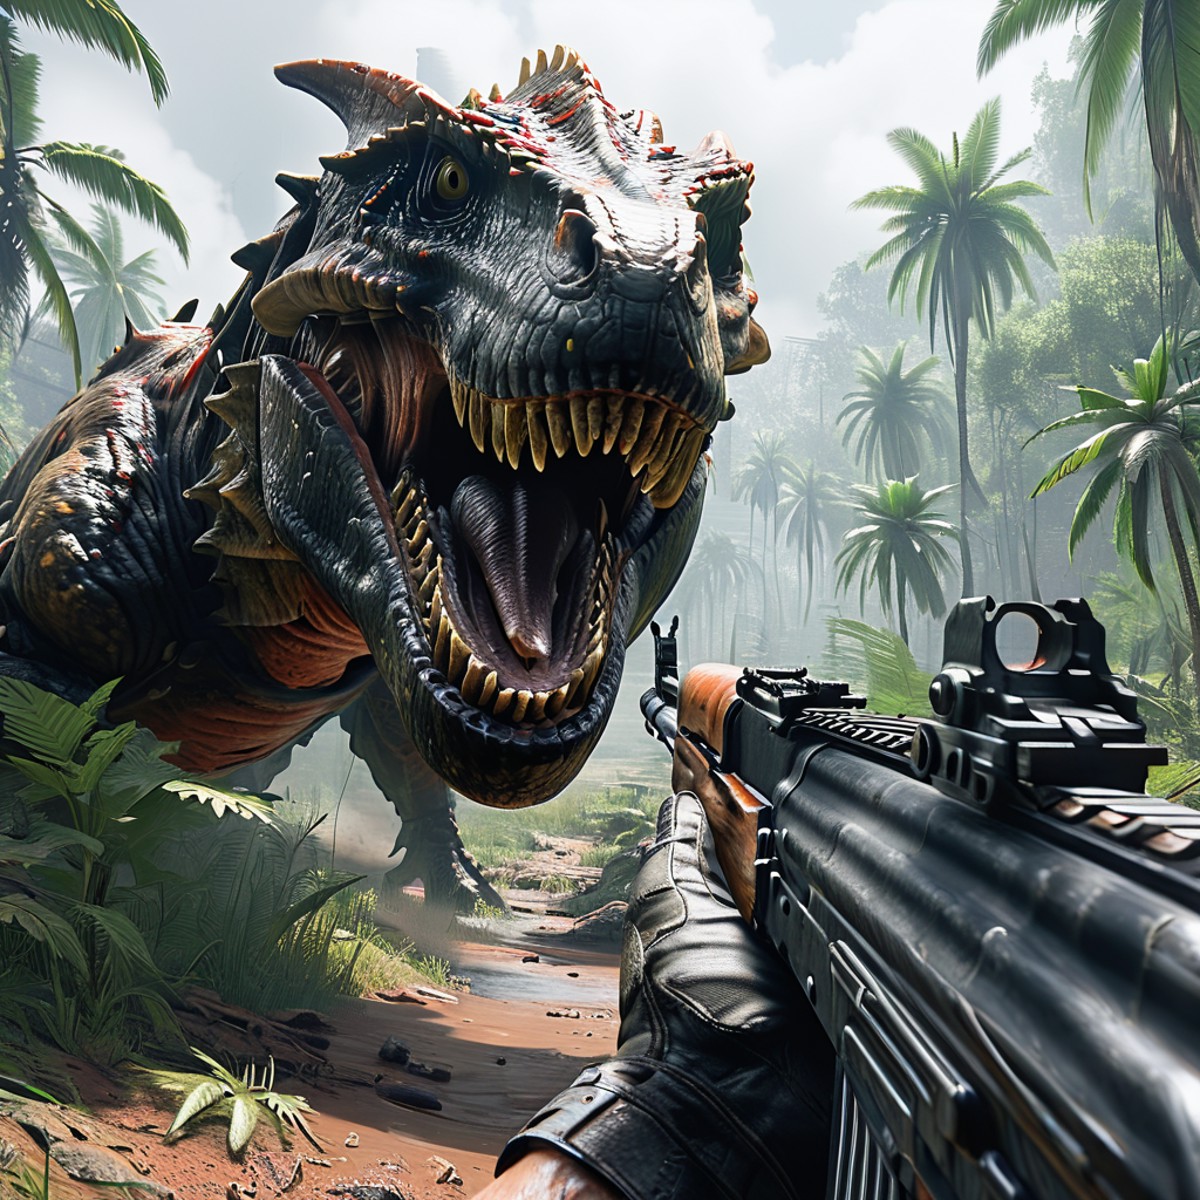 a cinematic shot of a first person shooter, aiming with an ak-47, call of dudy, shooting giant T-rex, jungle in background...